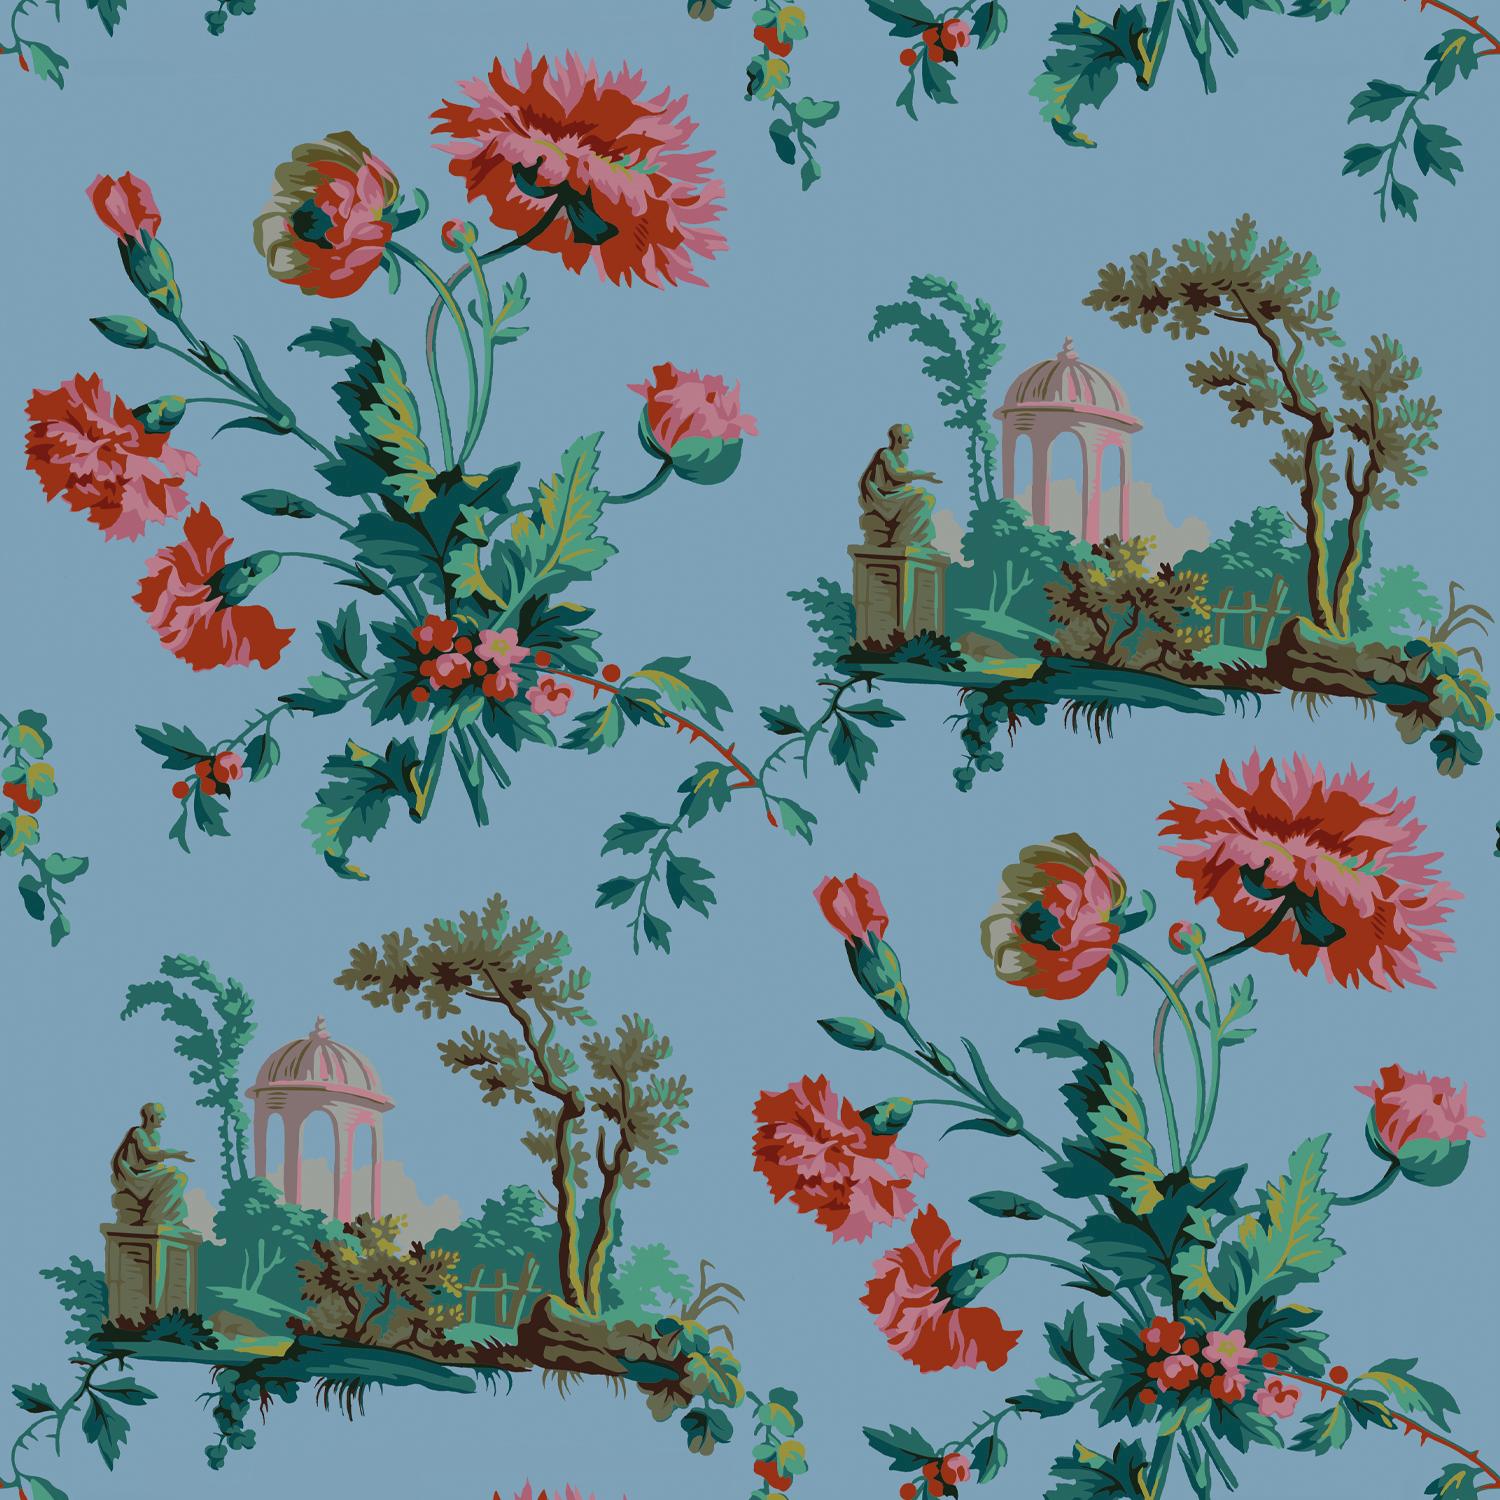 Repeat: 67 cm / 26.4 in

Founded in 2019, the French wallpaper brand Papier Francais is defined by the rediscovery, restoration, and revival of iconic wallpapers dating back to the French “Golden Age of wallpaper” of the 18th and 19th centuries.